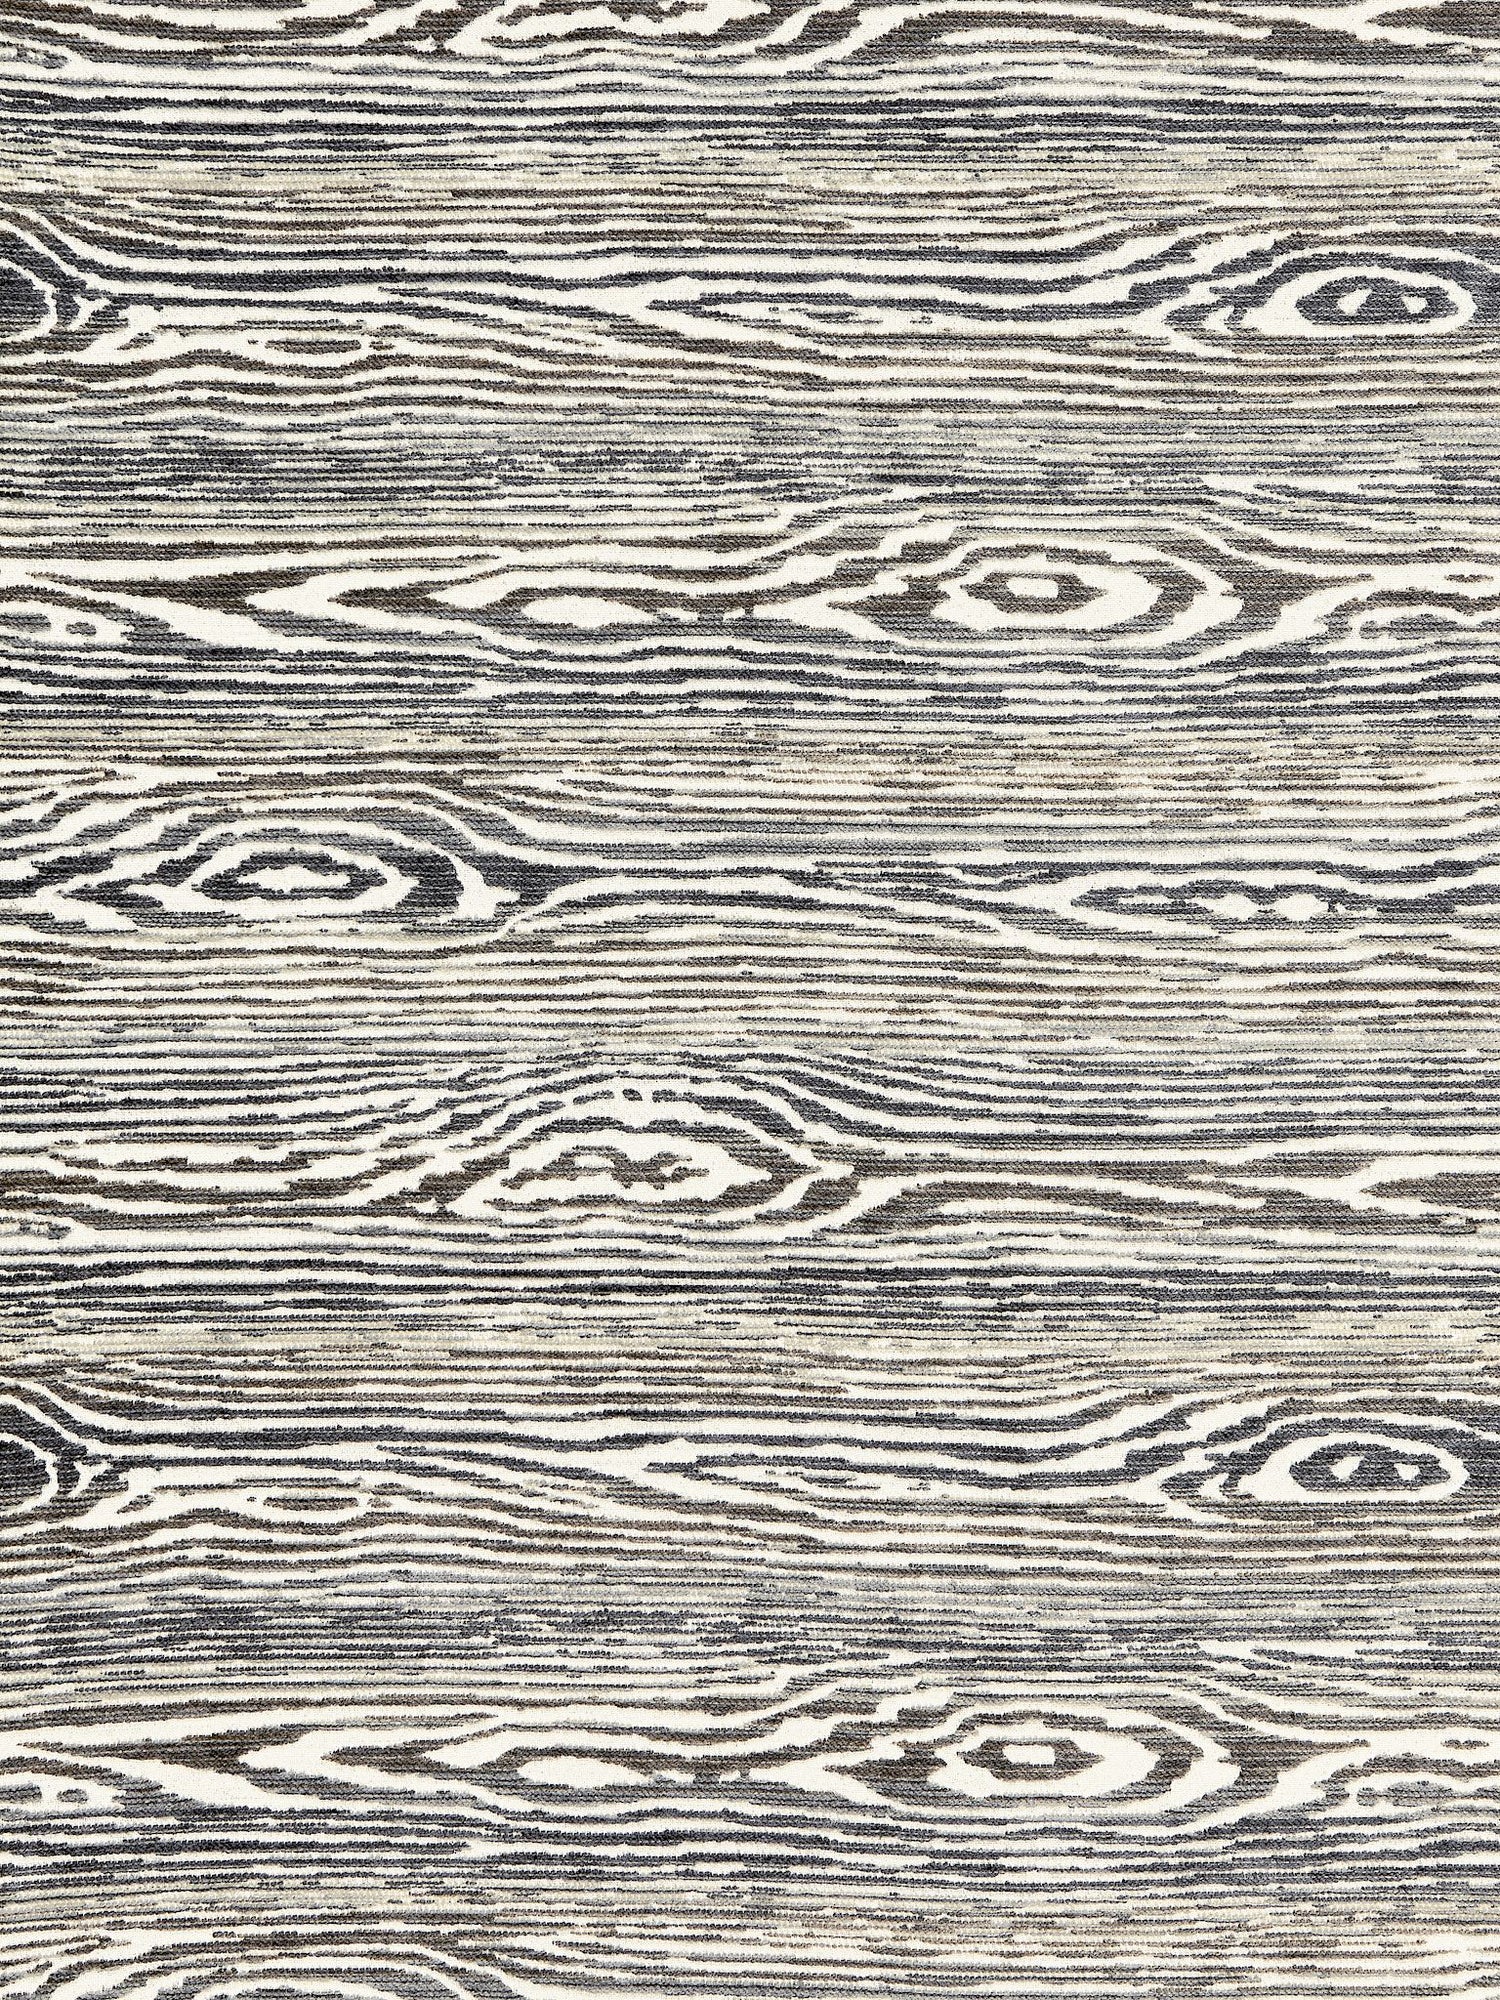 Muir Woods fabric in graphite color - pattern number CD 0056OB41 - by Scalamandre in the Old World Weavers collection